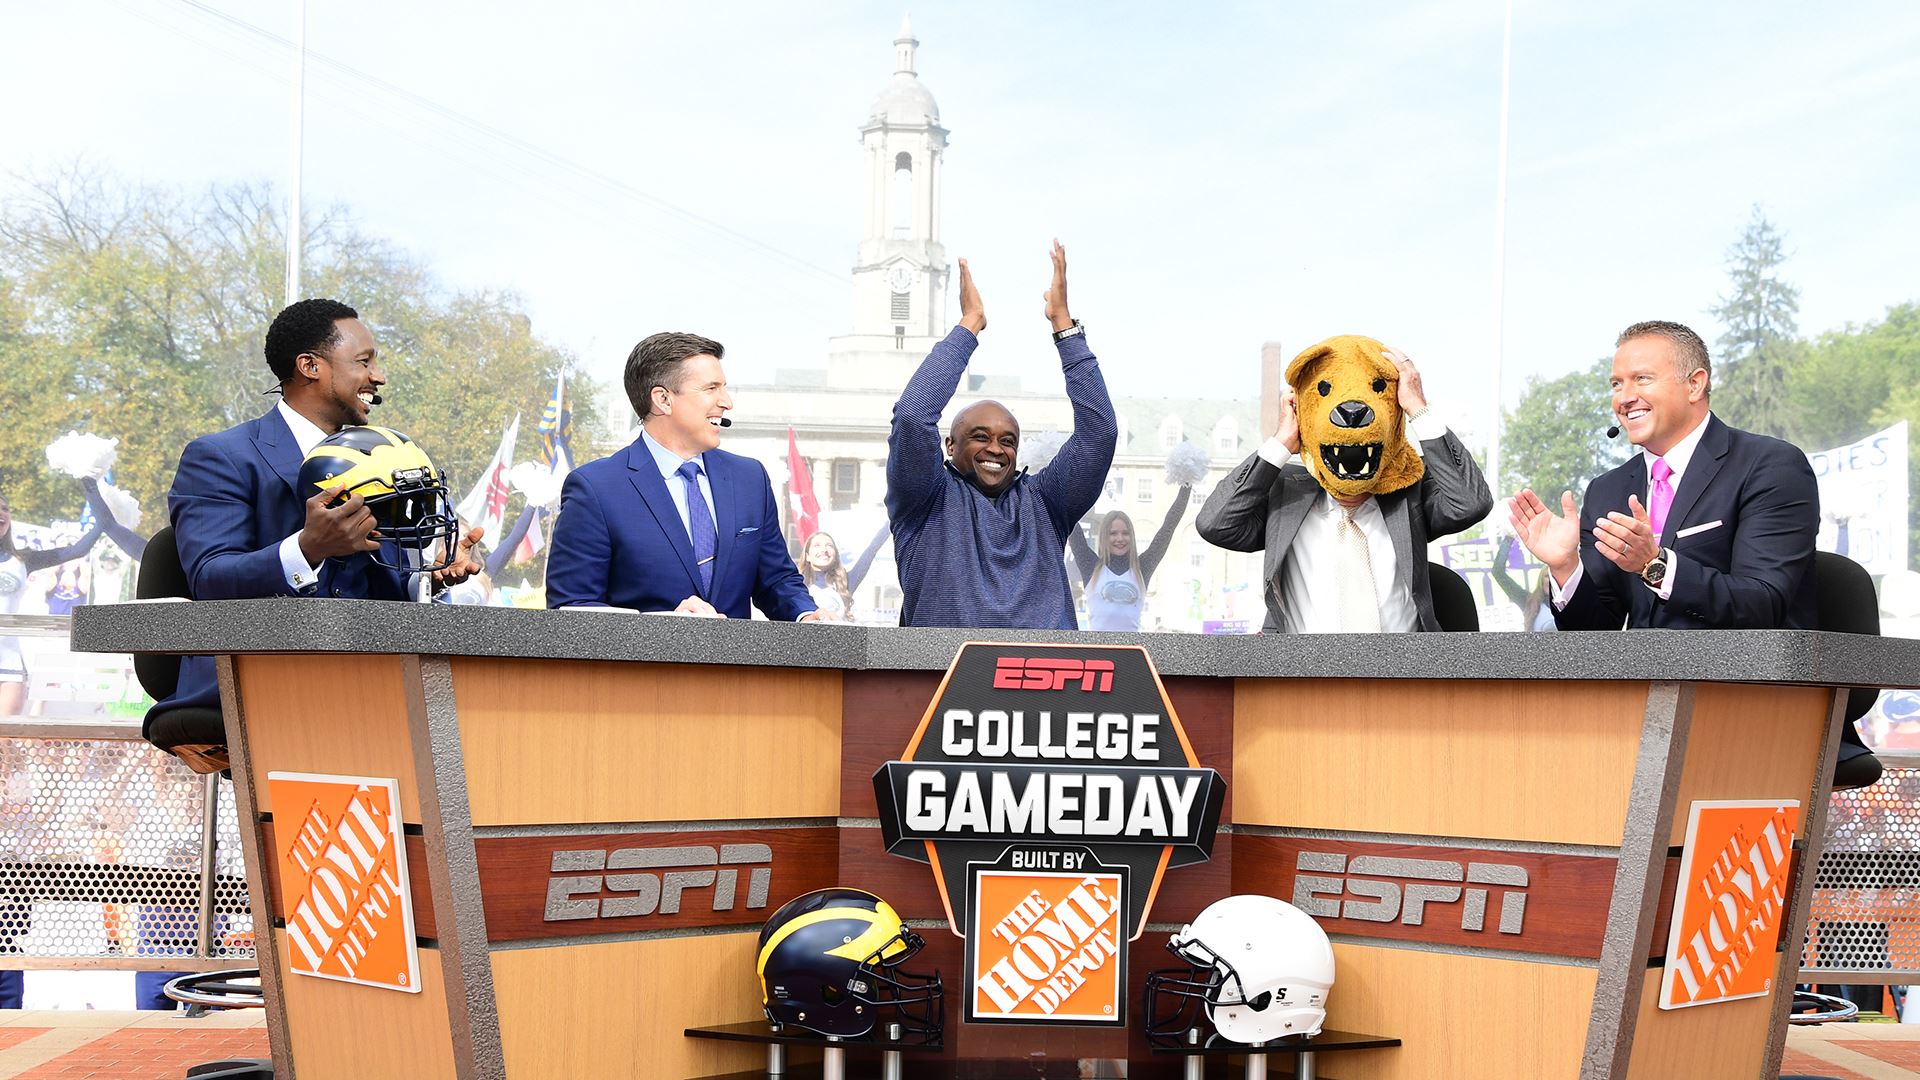 ESPN College GameDay is coming to Happy Valley for Penn State-Michigan